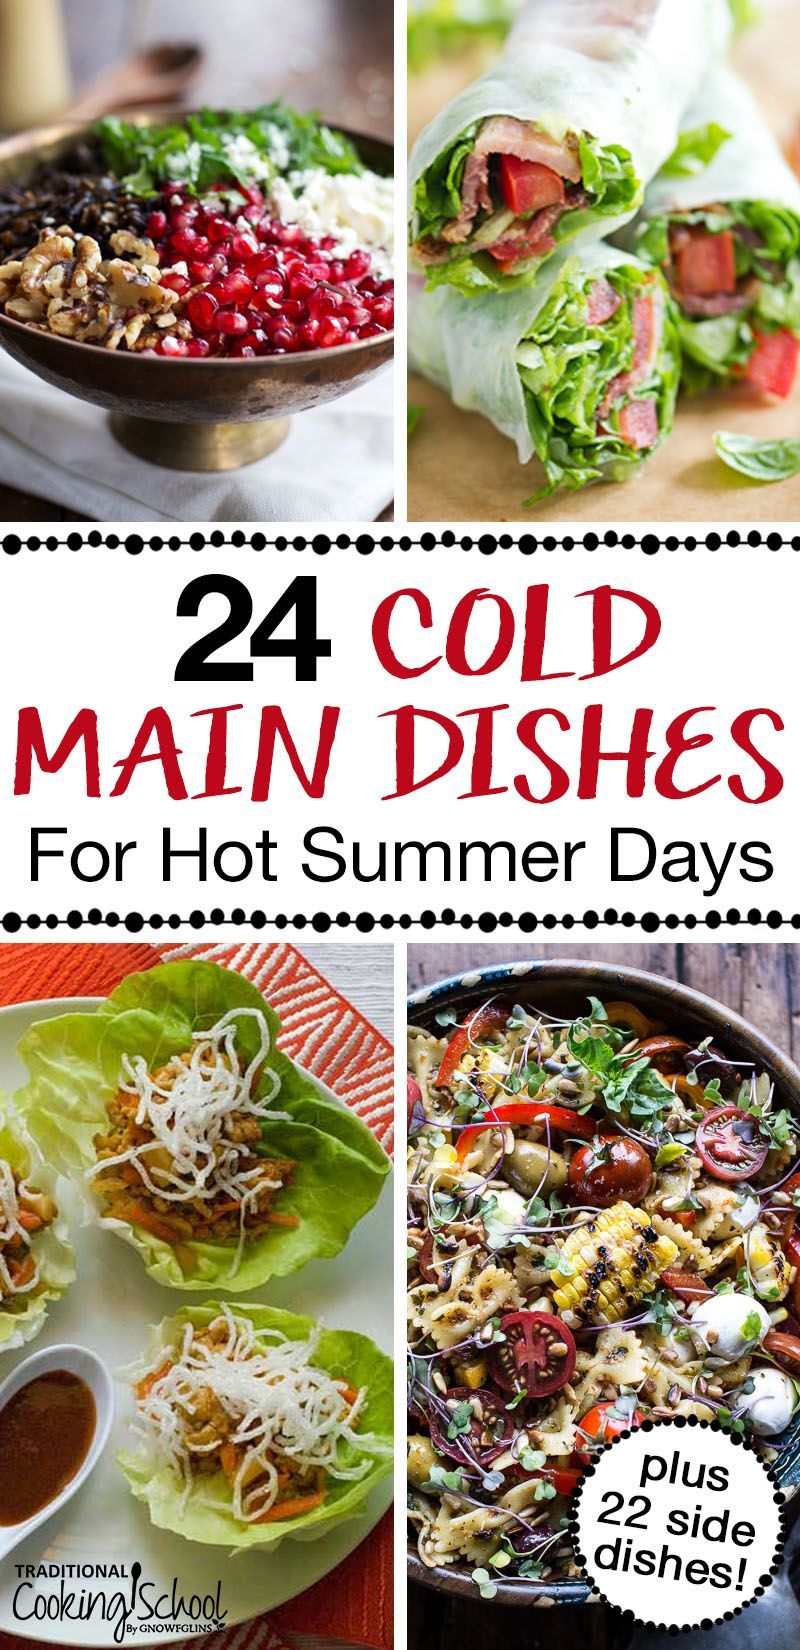 24 {Cold!} Main Dishes & 22 Sides for Hot Summer Days -   14 healthy recipes For One main dishes ideas